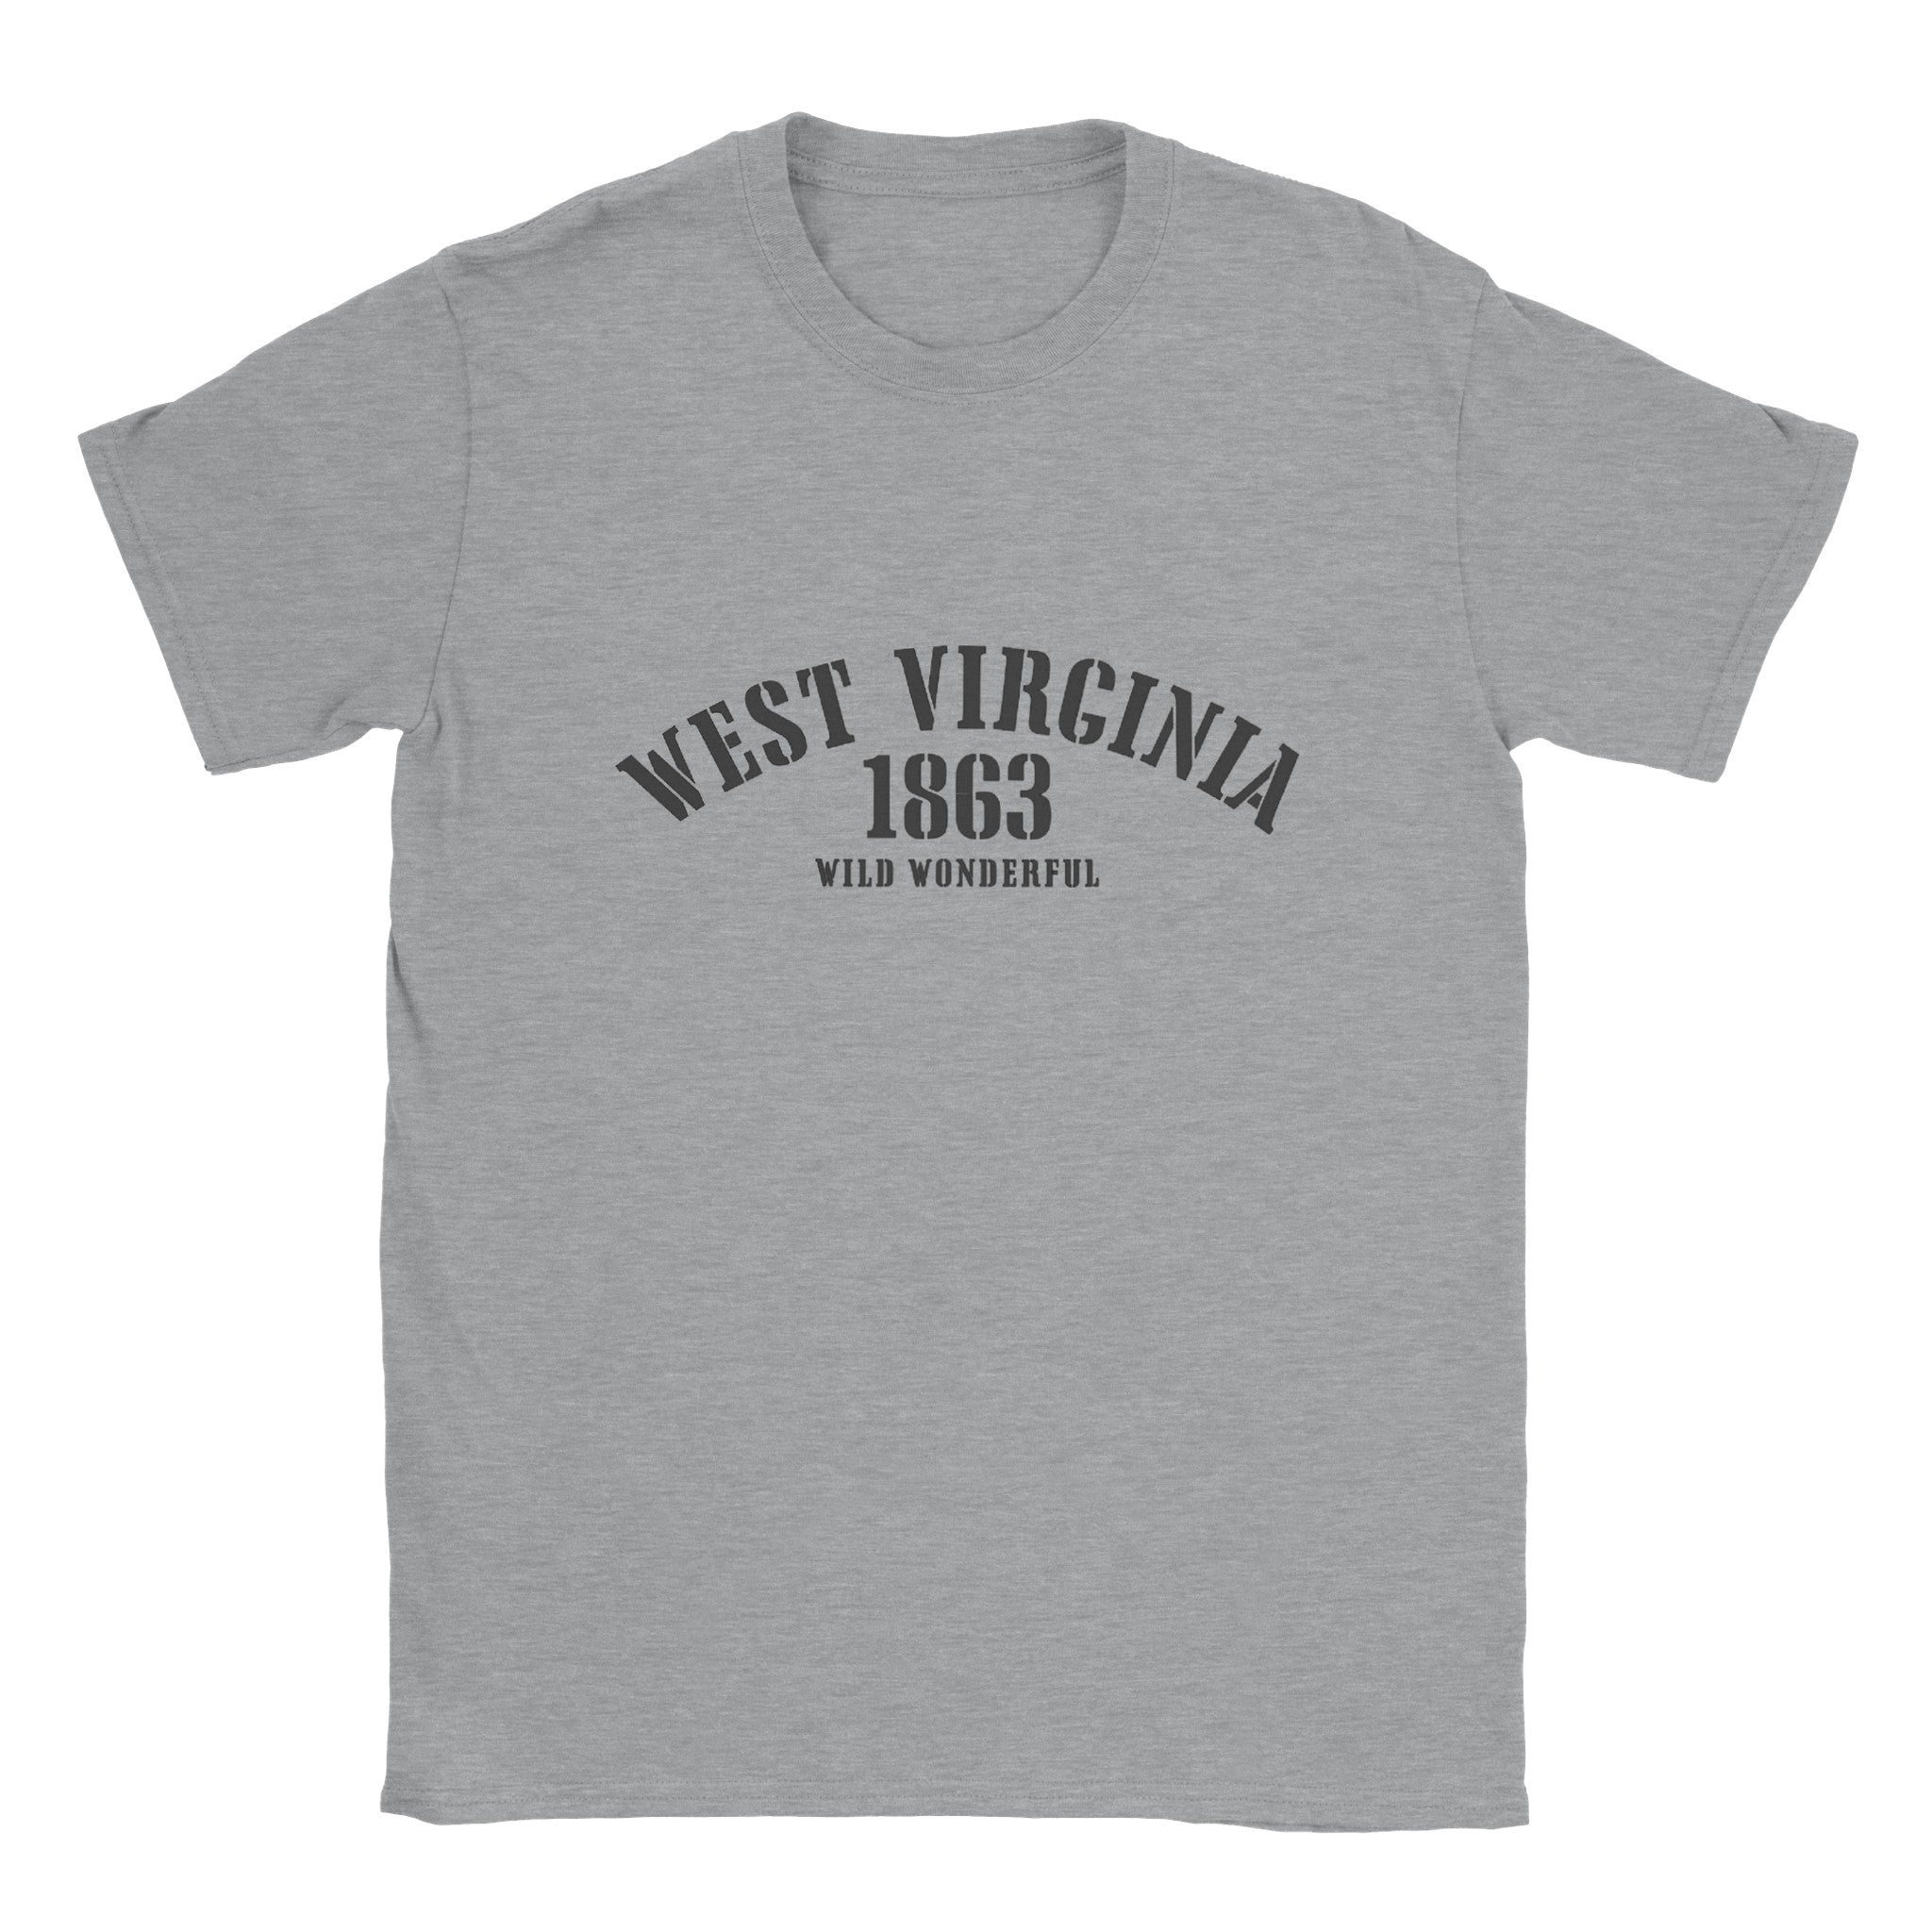 West Virginia- Classic Unisex Crewneck States T-shirt - Creations by Chris and Carlos